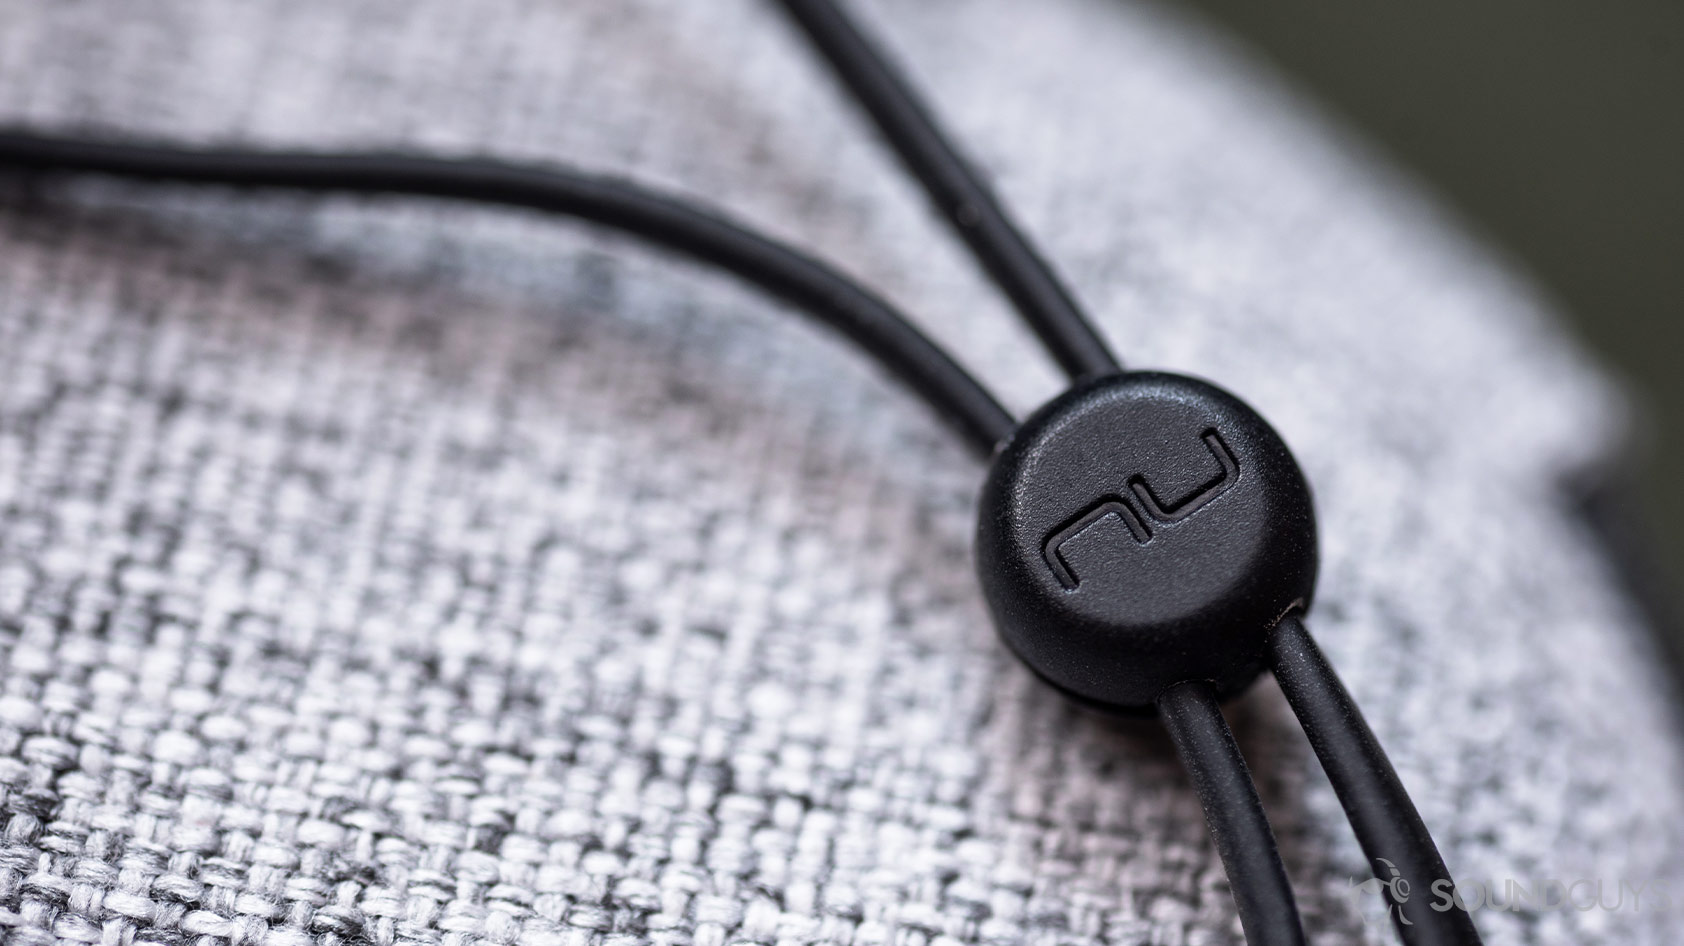 A macro photo of the Massdrop x NuForce Stride wireless earbuds (blue) of the NuForce-branded cable cinch mechanism.